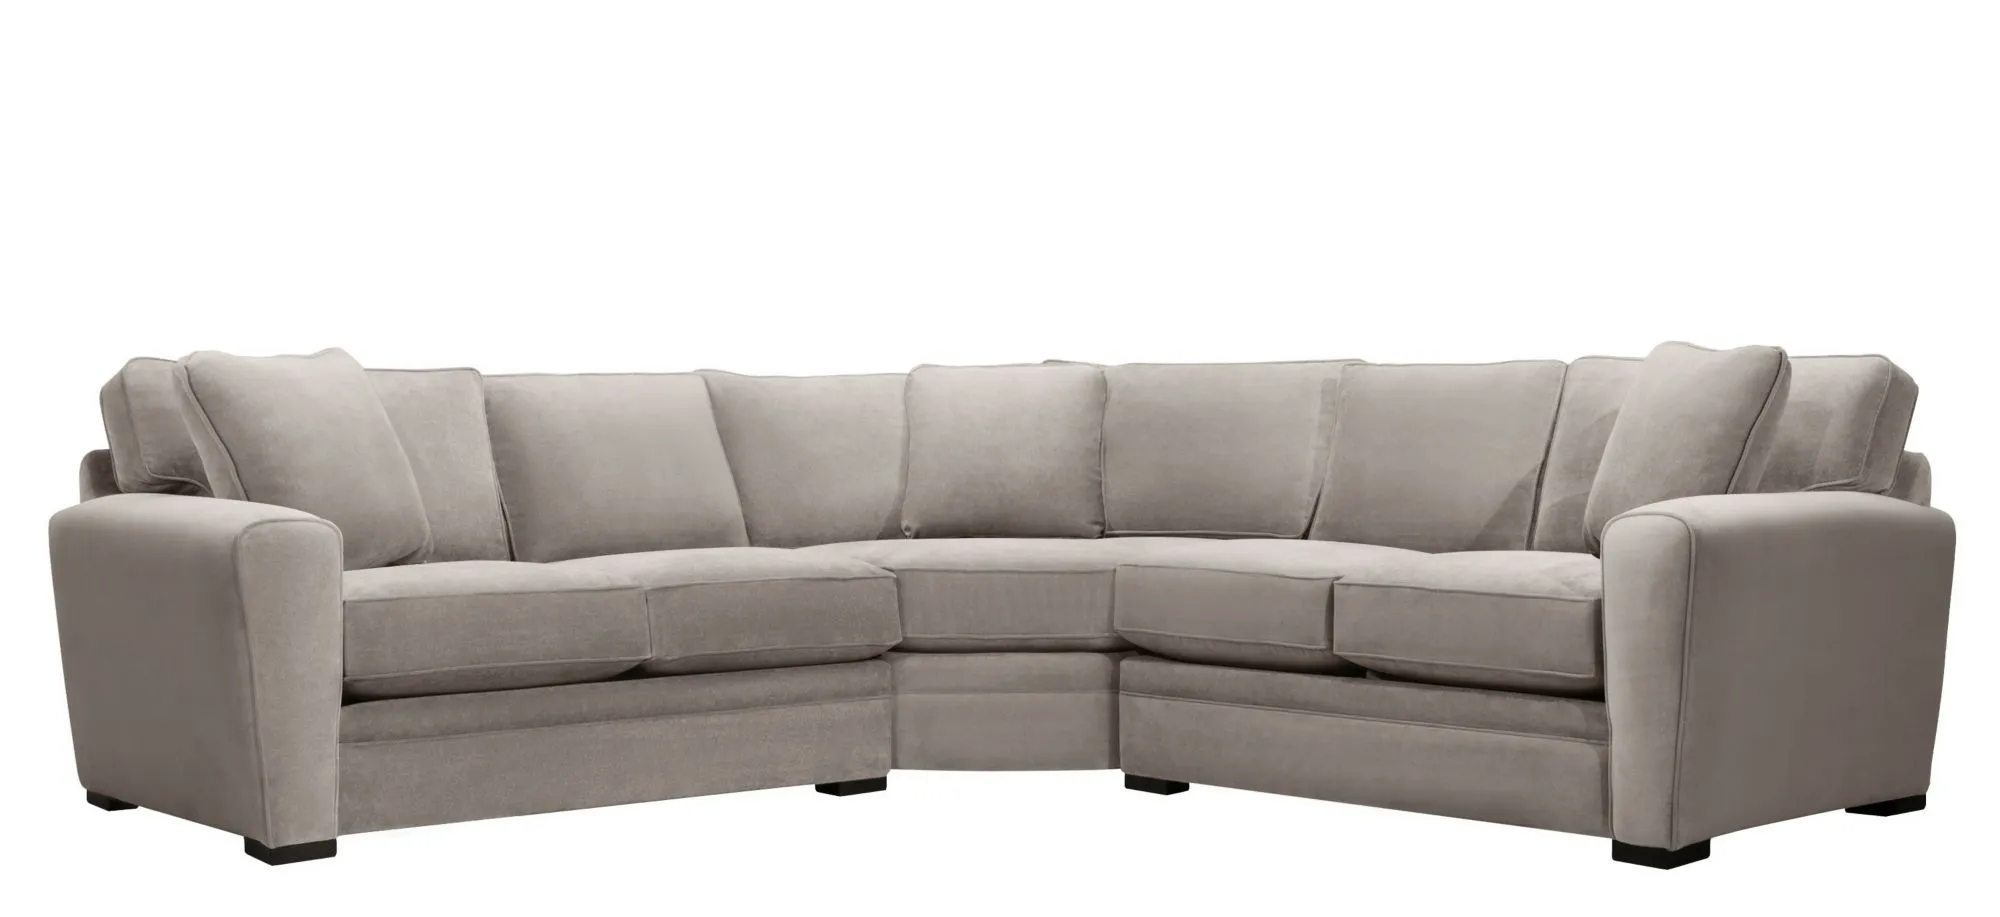 Artemis II 3-pc. Symmetrical Sectional Sofa in Gypsy Platinum by Jonathan Louis